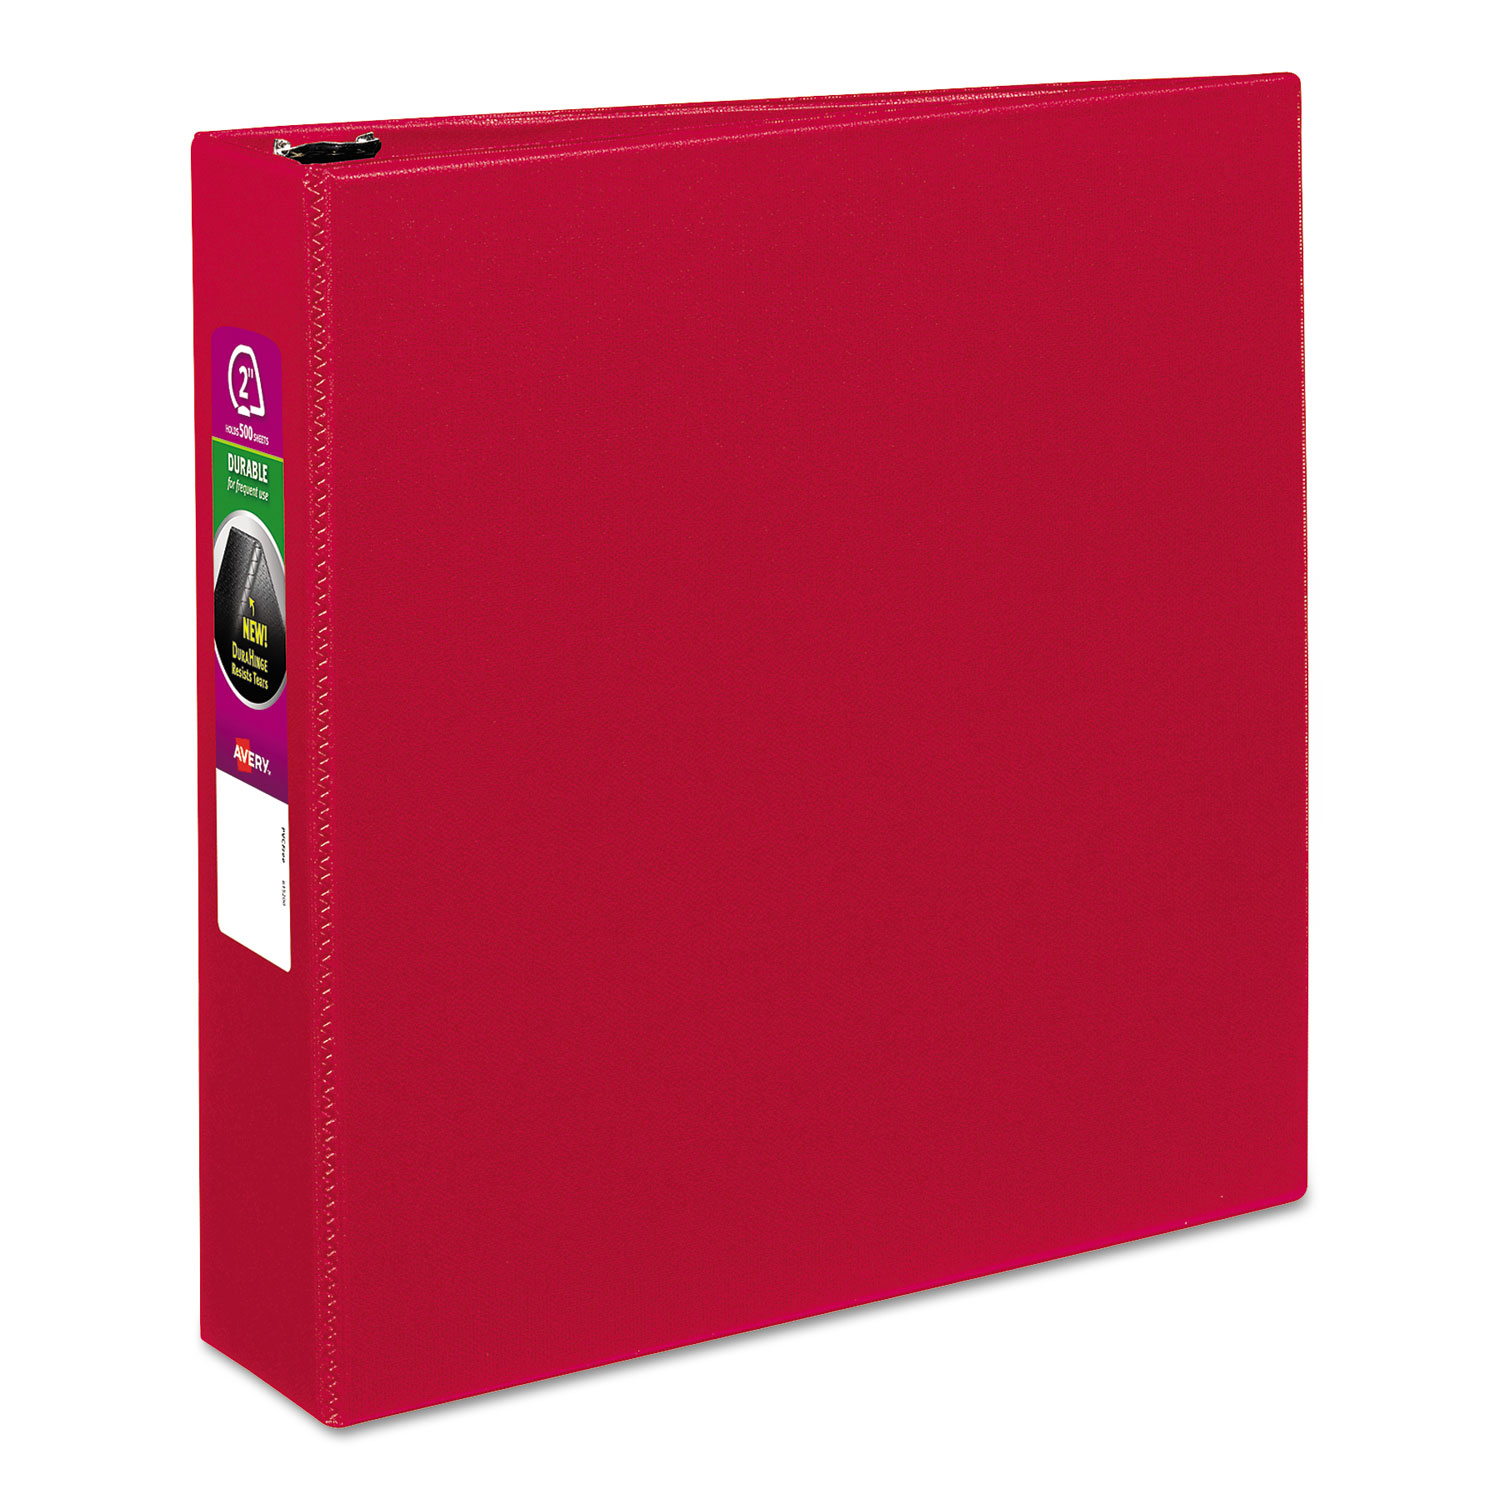  Avery 27203 Durable Non-View Binder with DuraHinge and Slant Rings, 3 Rings, 2 Capacity, 11 x 8.5, Red (AVE27203) 